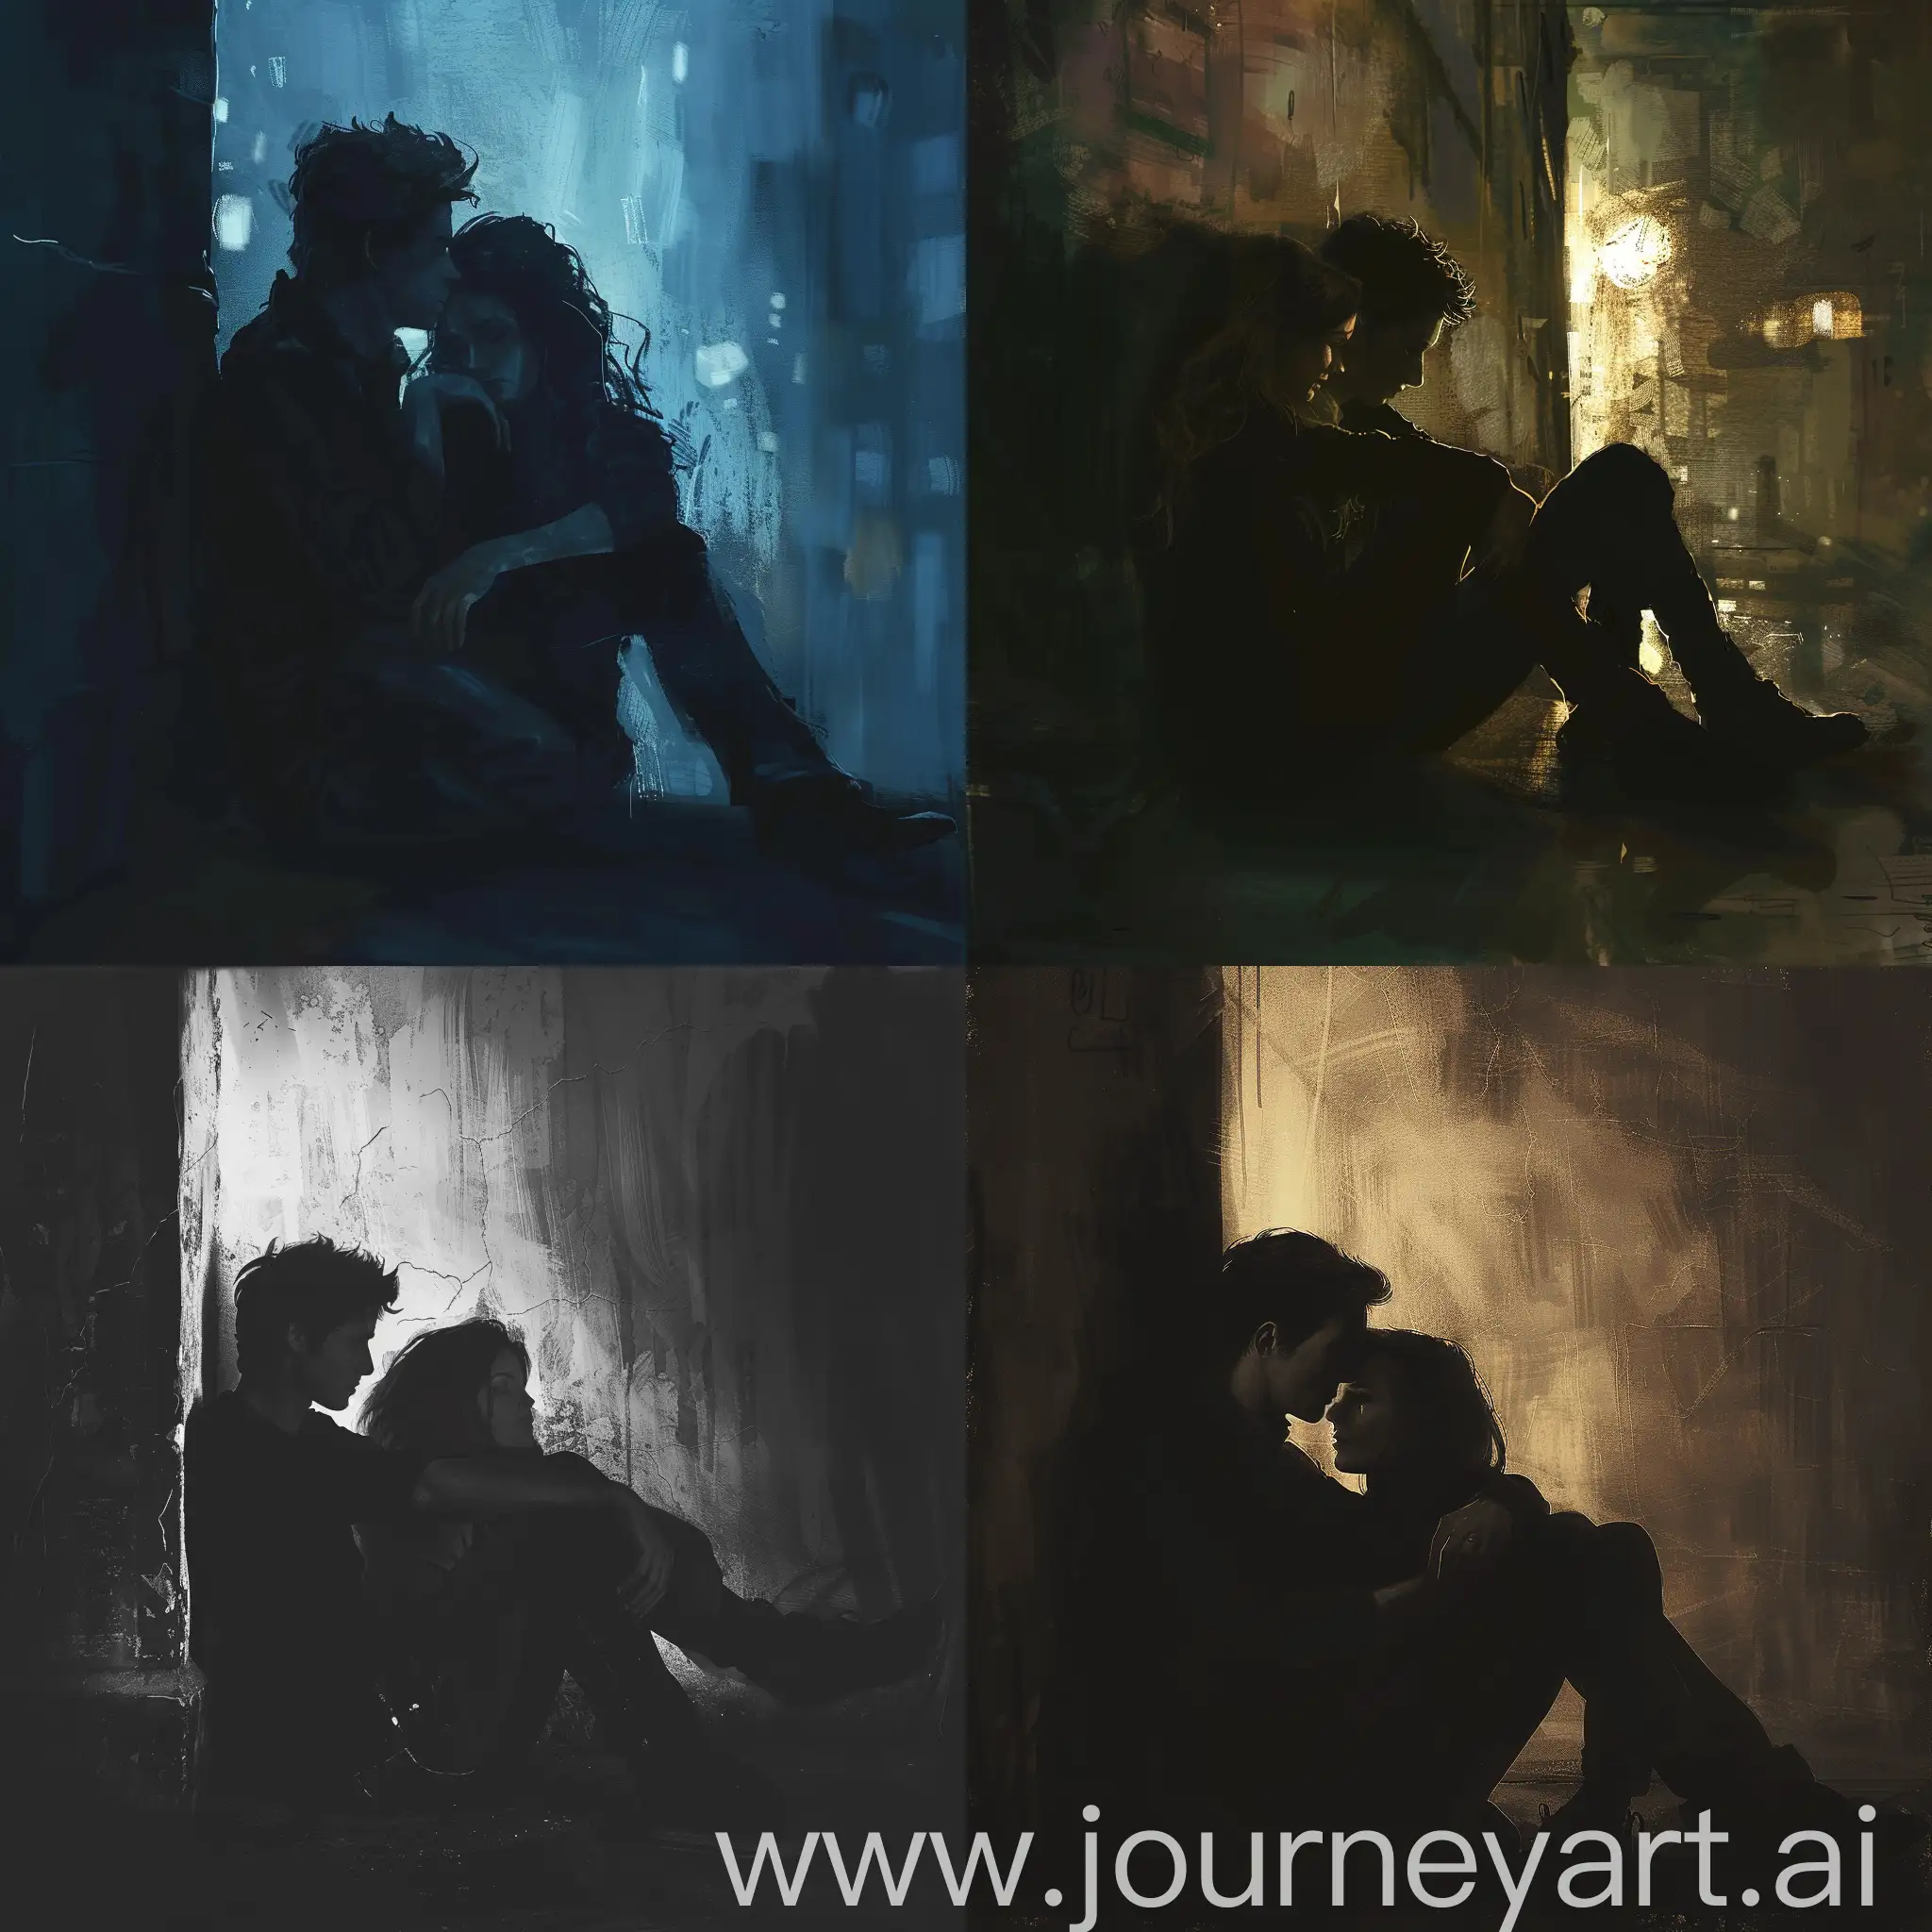 In the dim light, they sit against the wall, her head resting gently on his shoulder. He leans back, their silhouettes merging in the soft glow. The city sounds fade as they find solace in each other's presence. His hand finds hers, fingers intertwining in a silent promise. Together, they share a moment of quiet intimacy amidst the chaos of the world, their love a beacon of warmth in the cool night air.